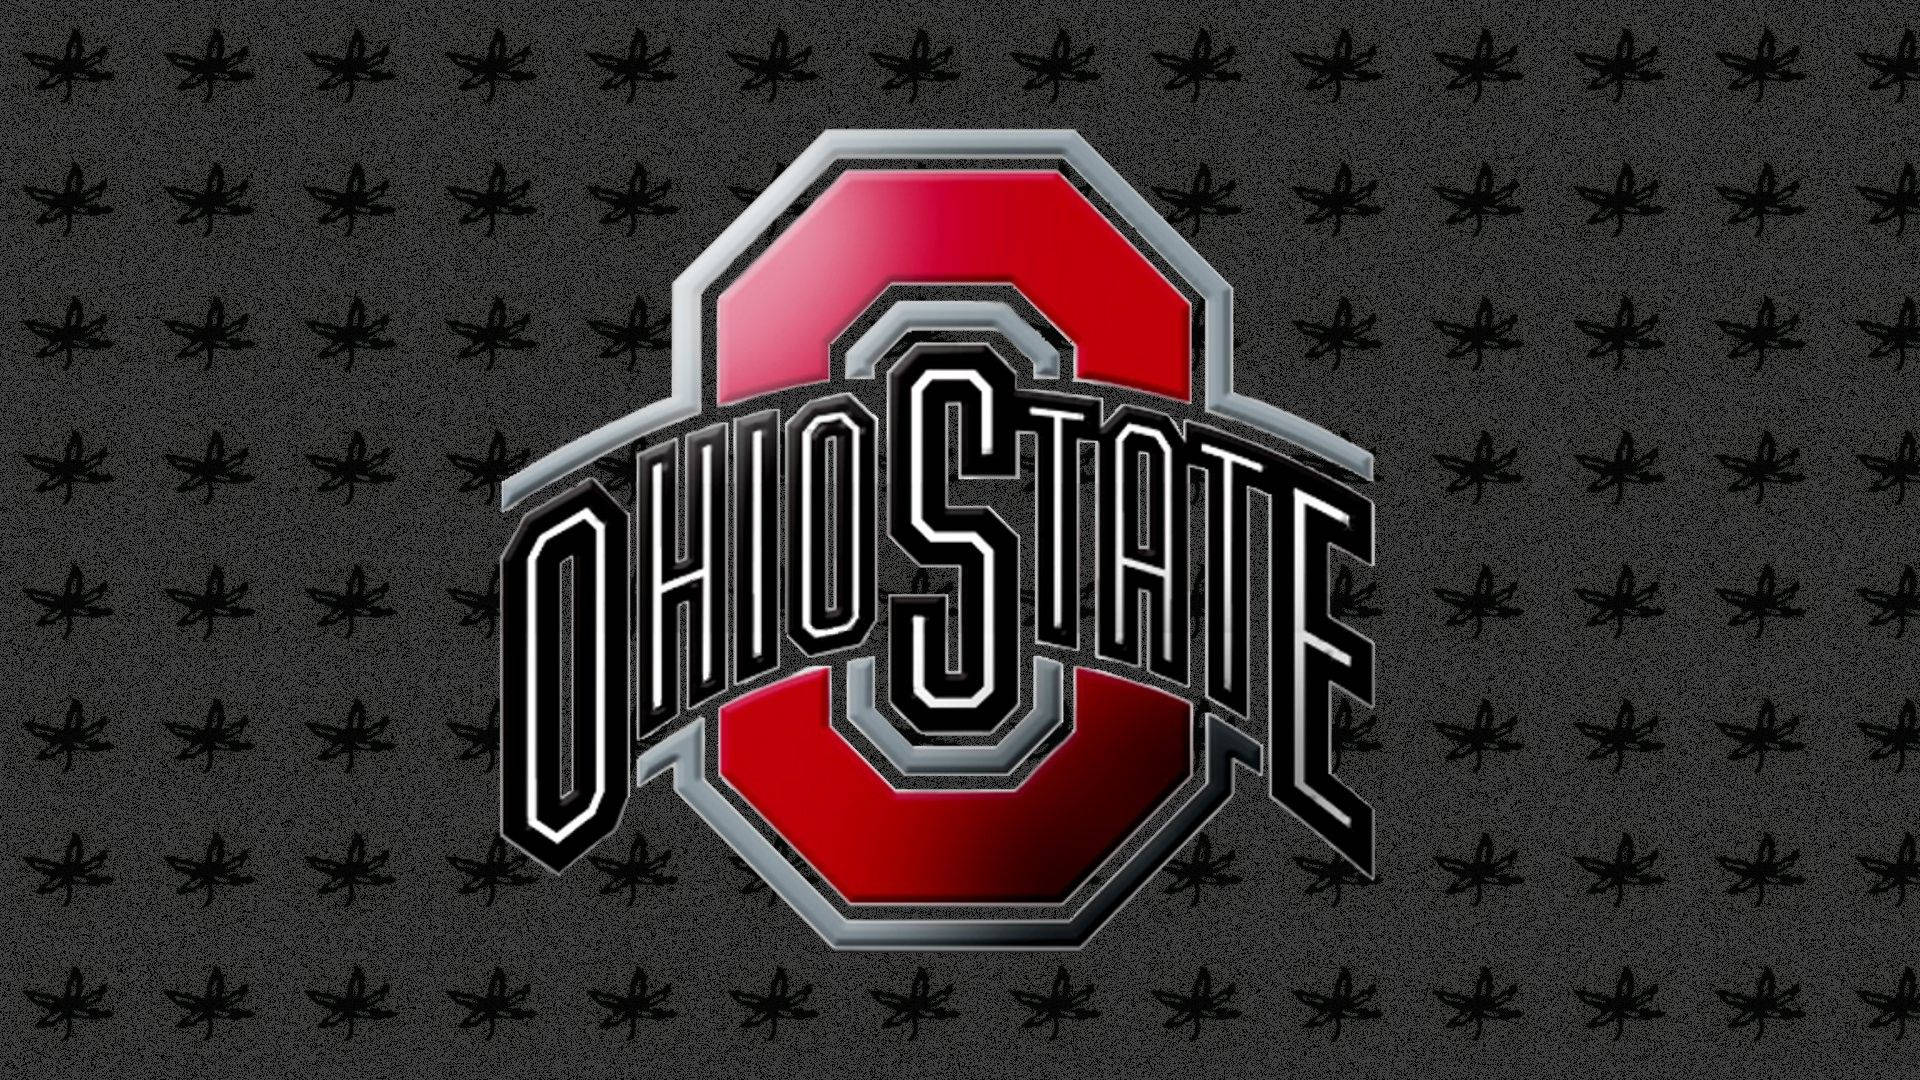 Ohio State University Pictures Wallpaper